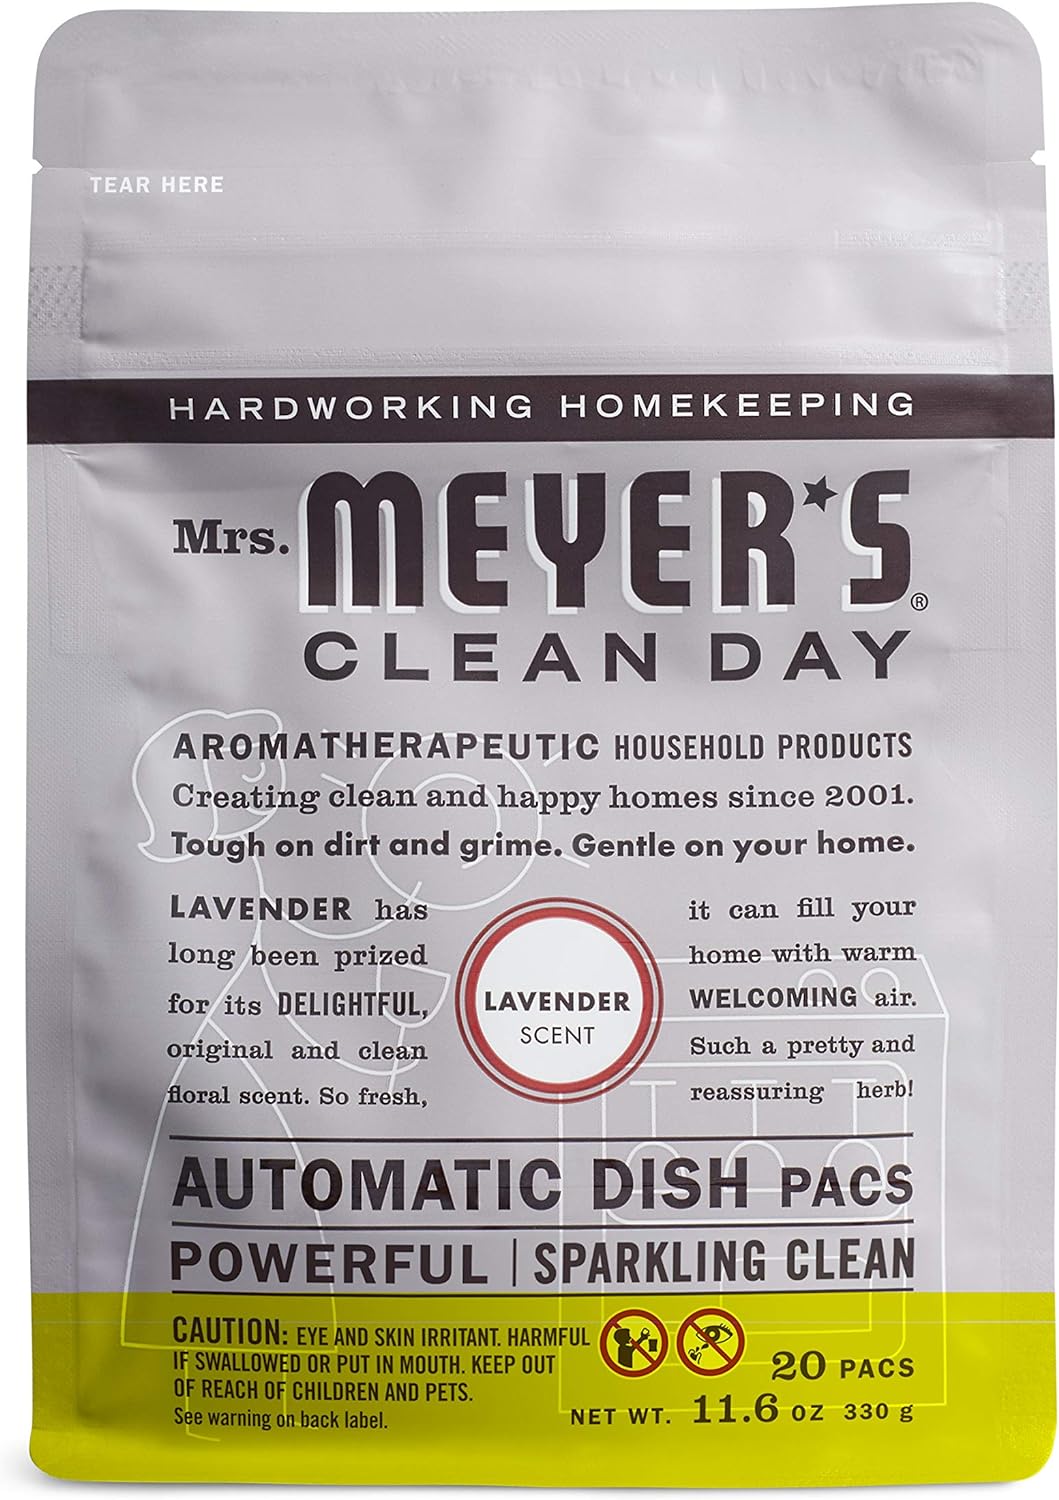 MRS. MEYER'S CLEAN DAY Automatic Dishwasher Pods, Lavender, 20 Count